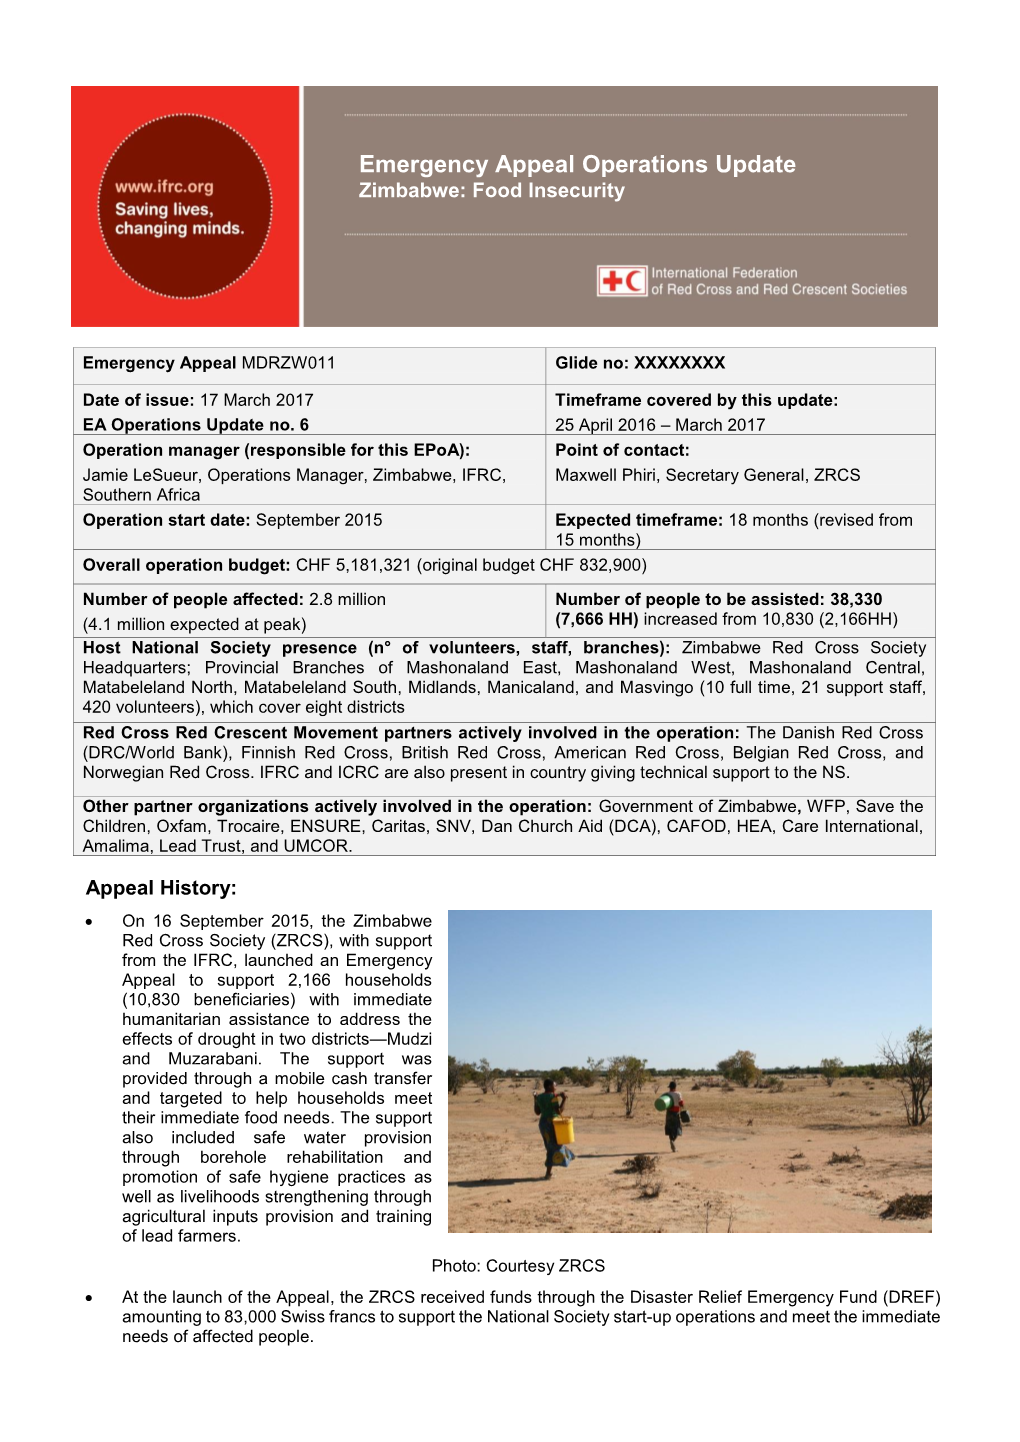 Emergency Appeal Operations Update Zimbabwe: Food Insecurity